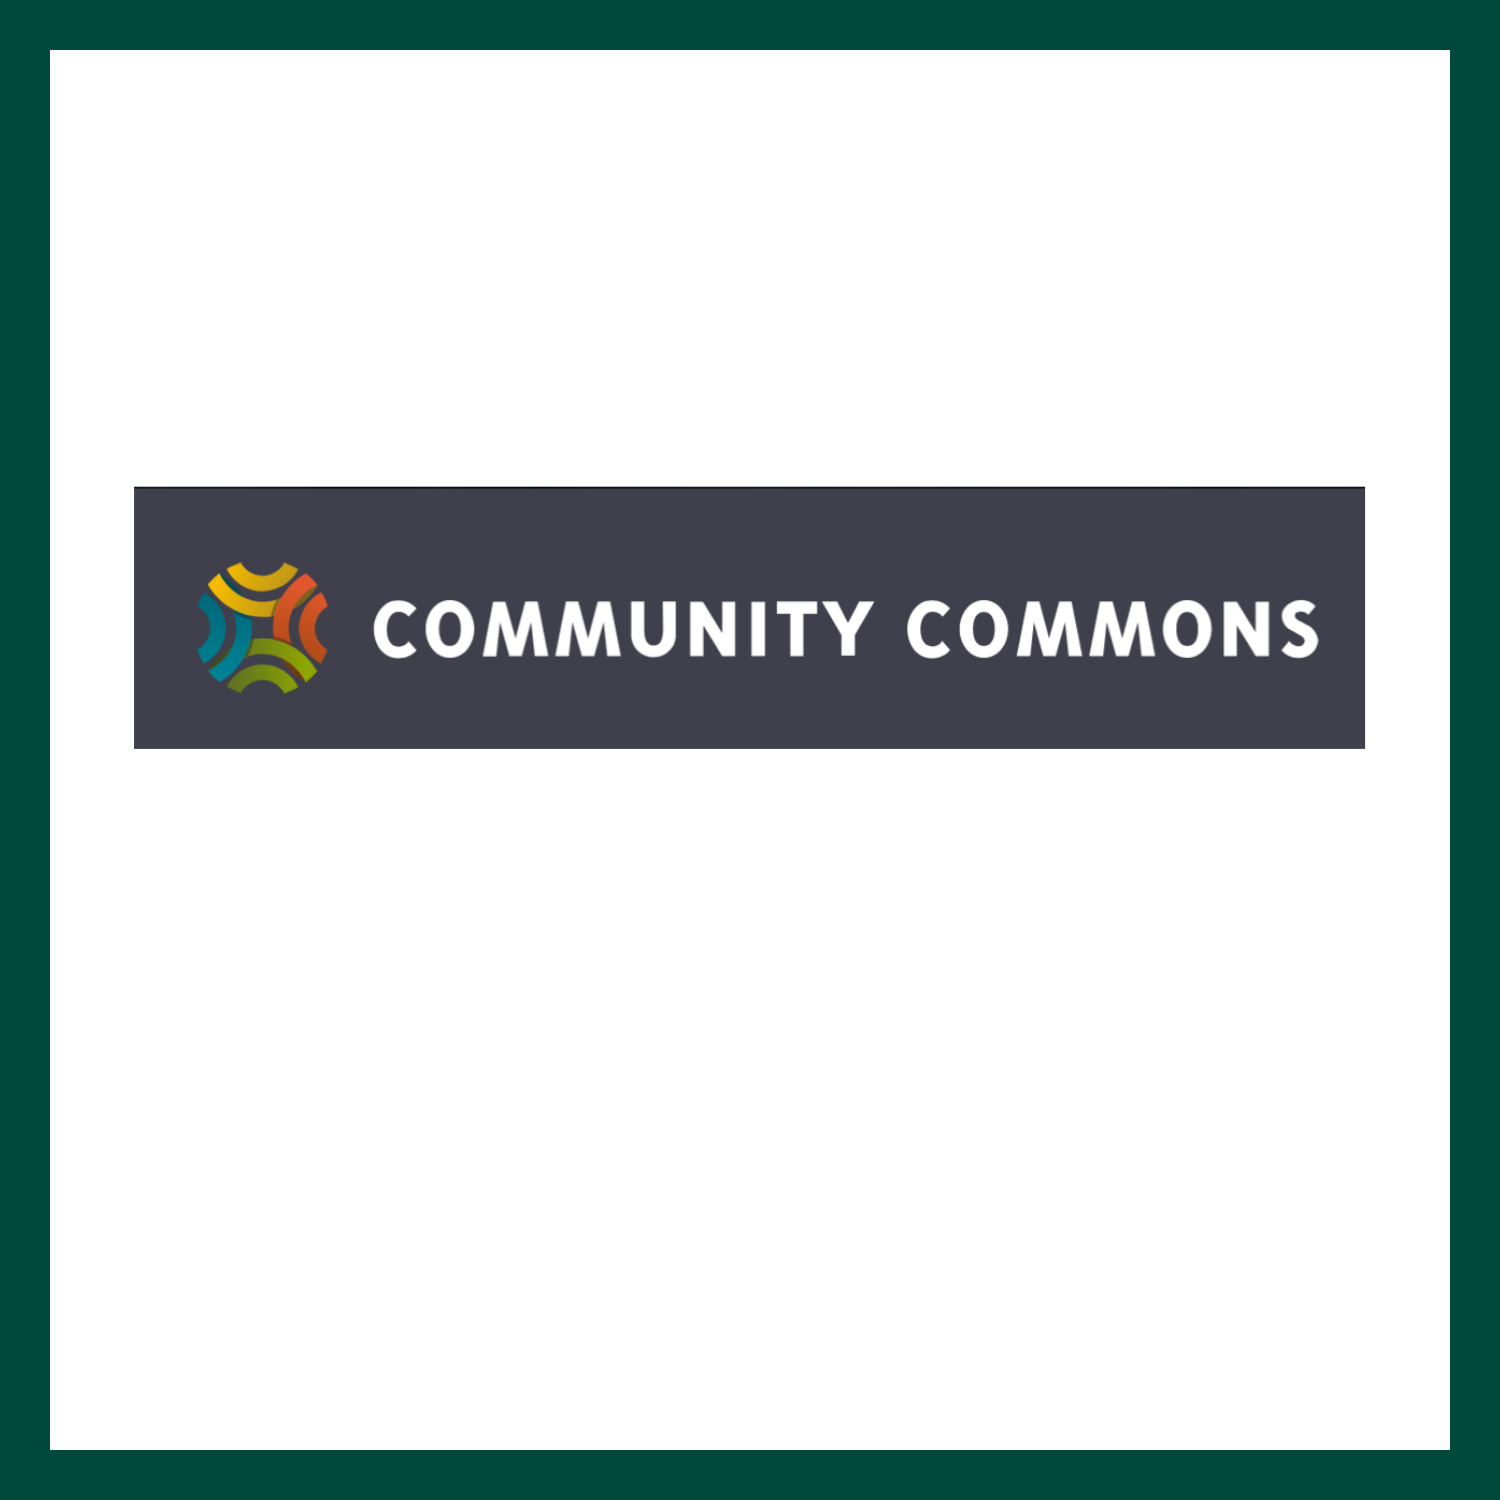 Community Commons logo with words written in white and background is black. On the right is a colorful sphere with the colors yellow, orange, green, and blue.